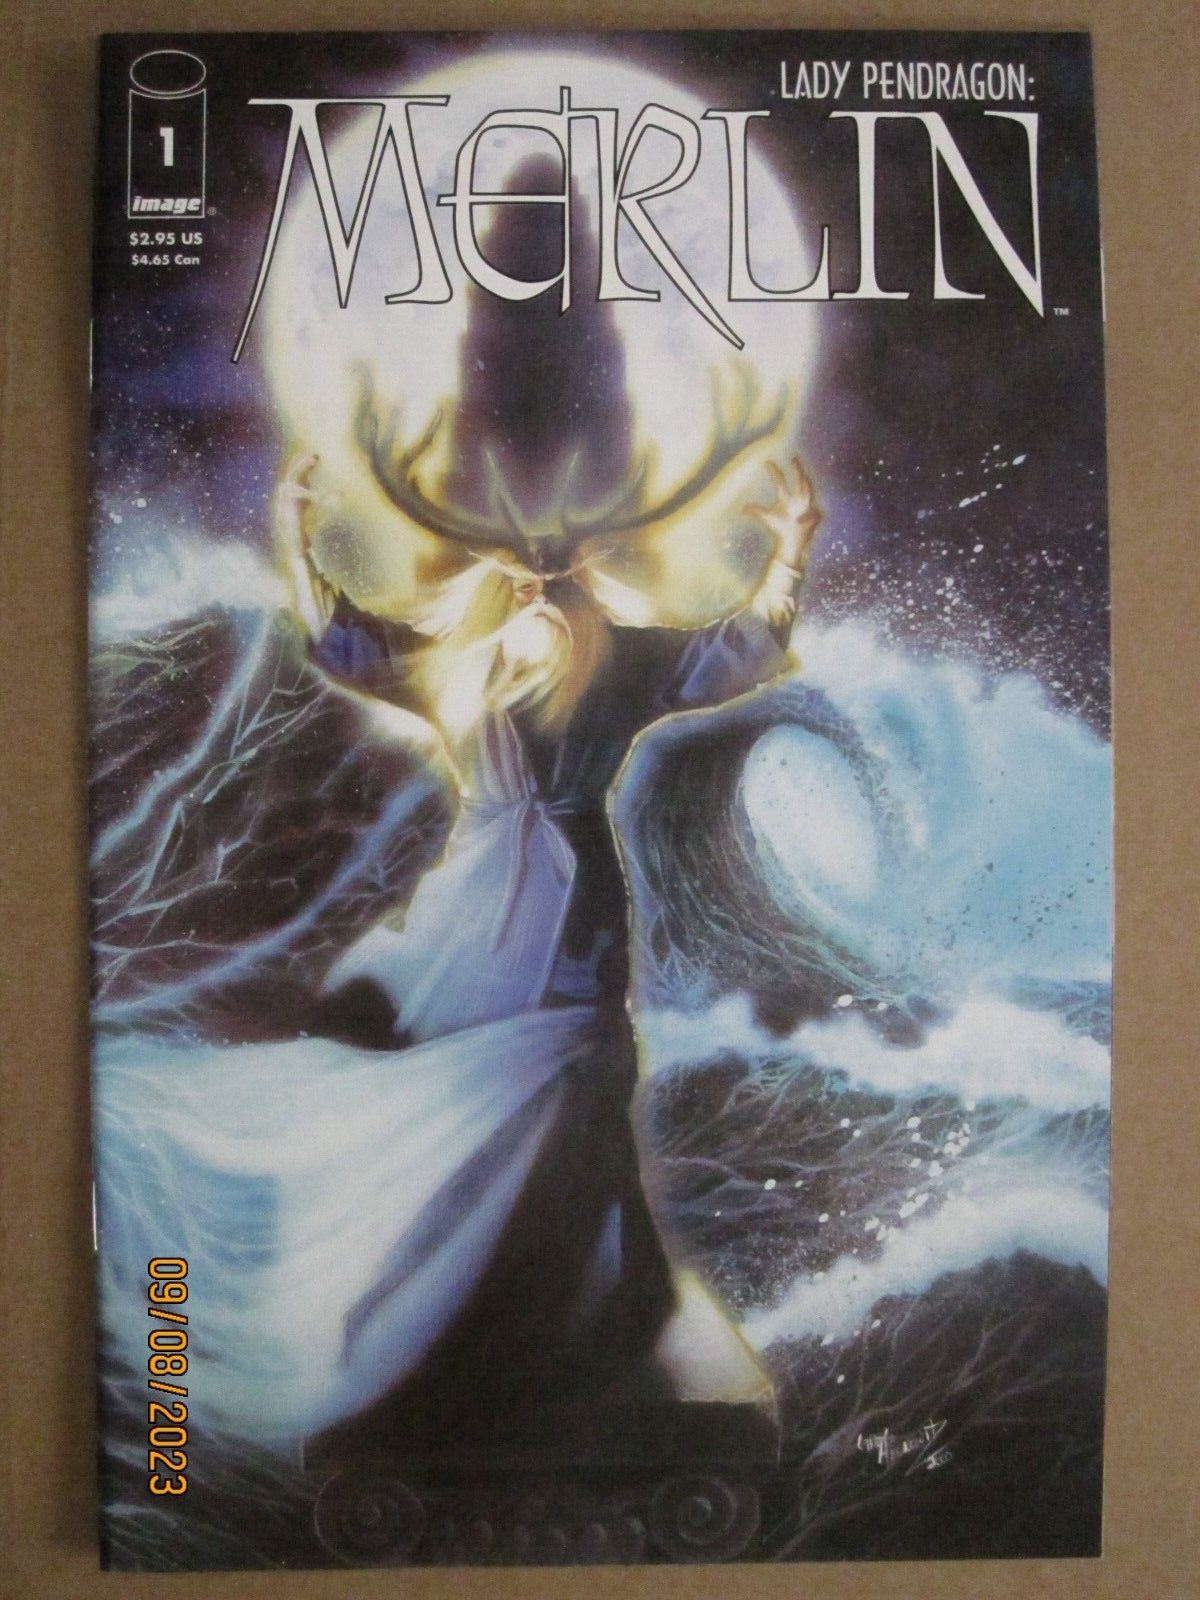 2000 IMAGE COMICS LADY PENDRAGON: MERLIN #1 PAINTED COVER BY GREG ARONOWITZ